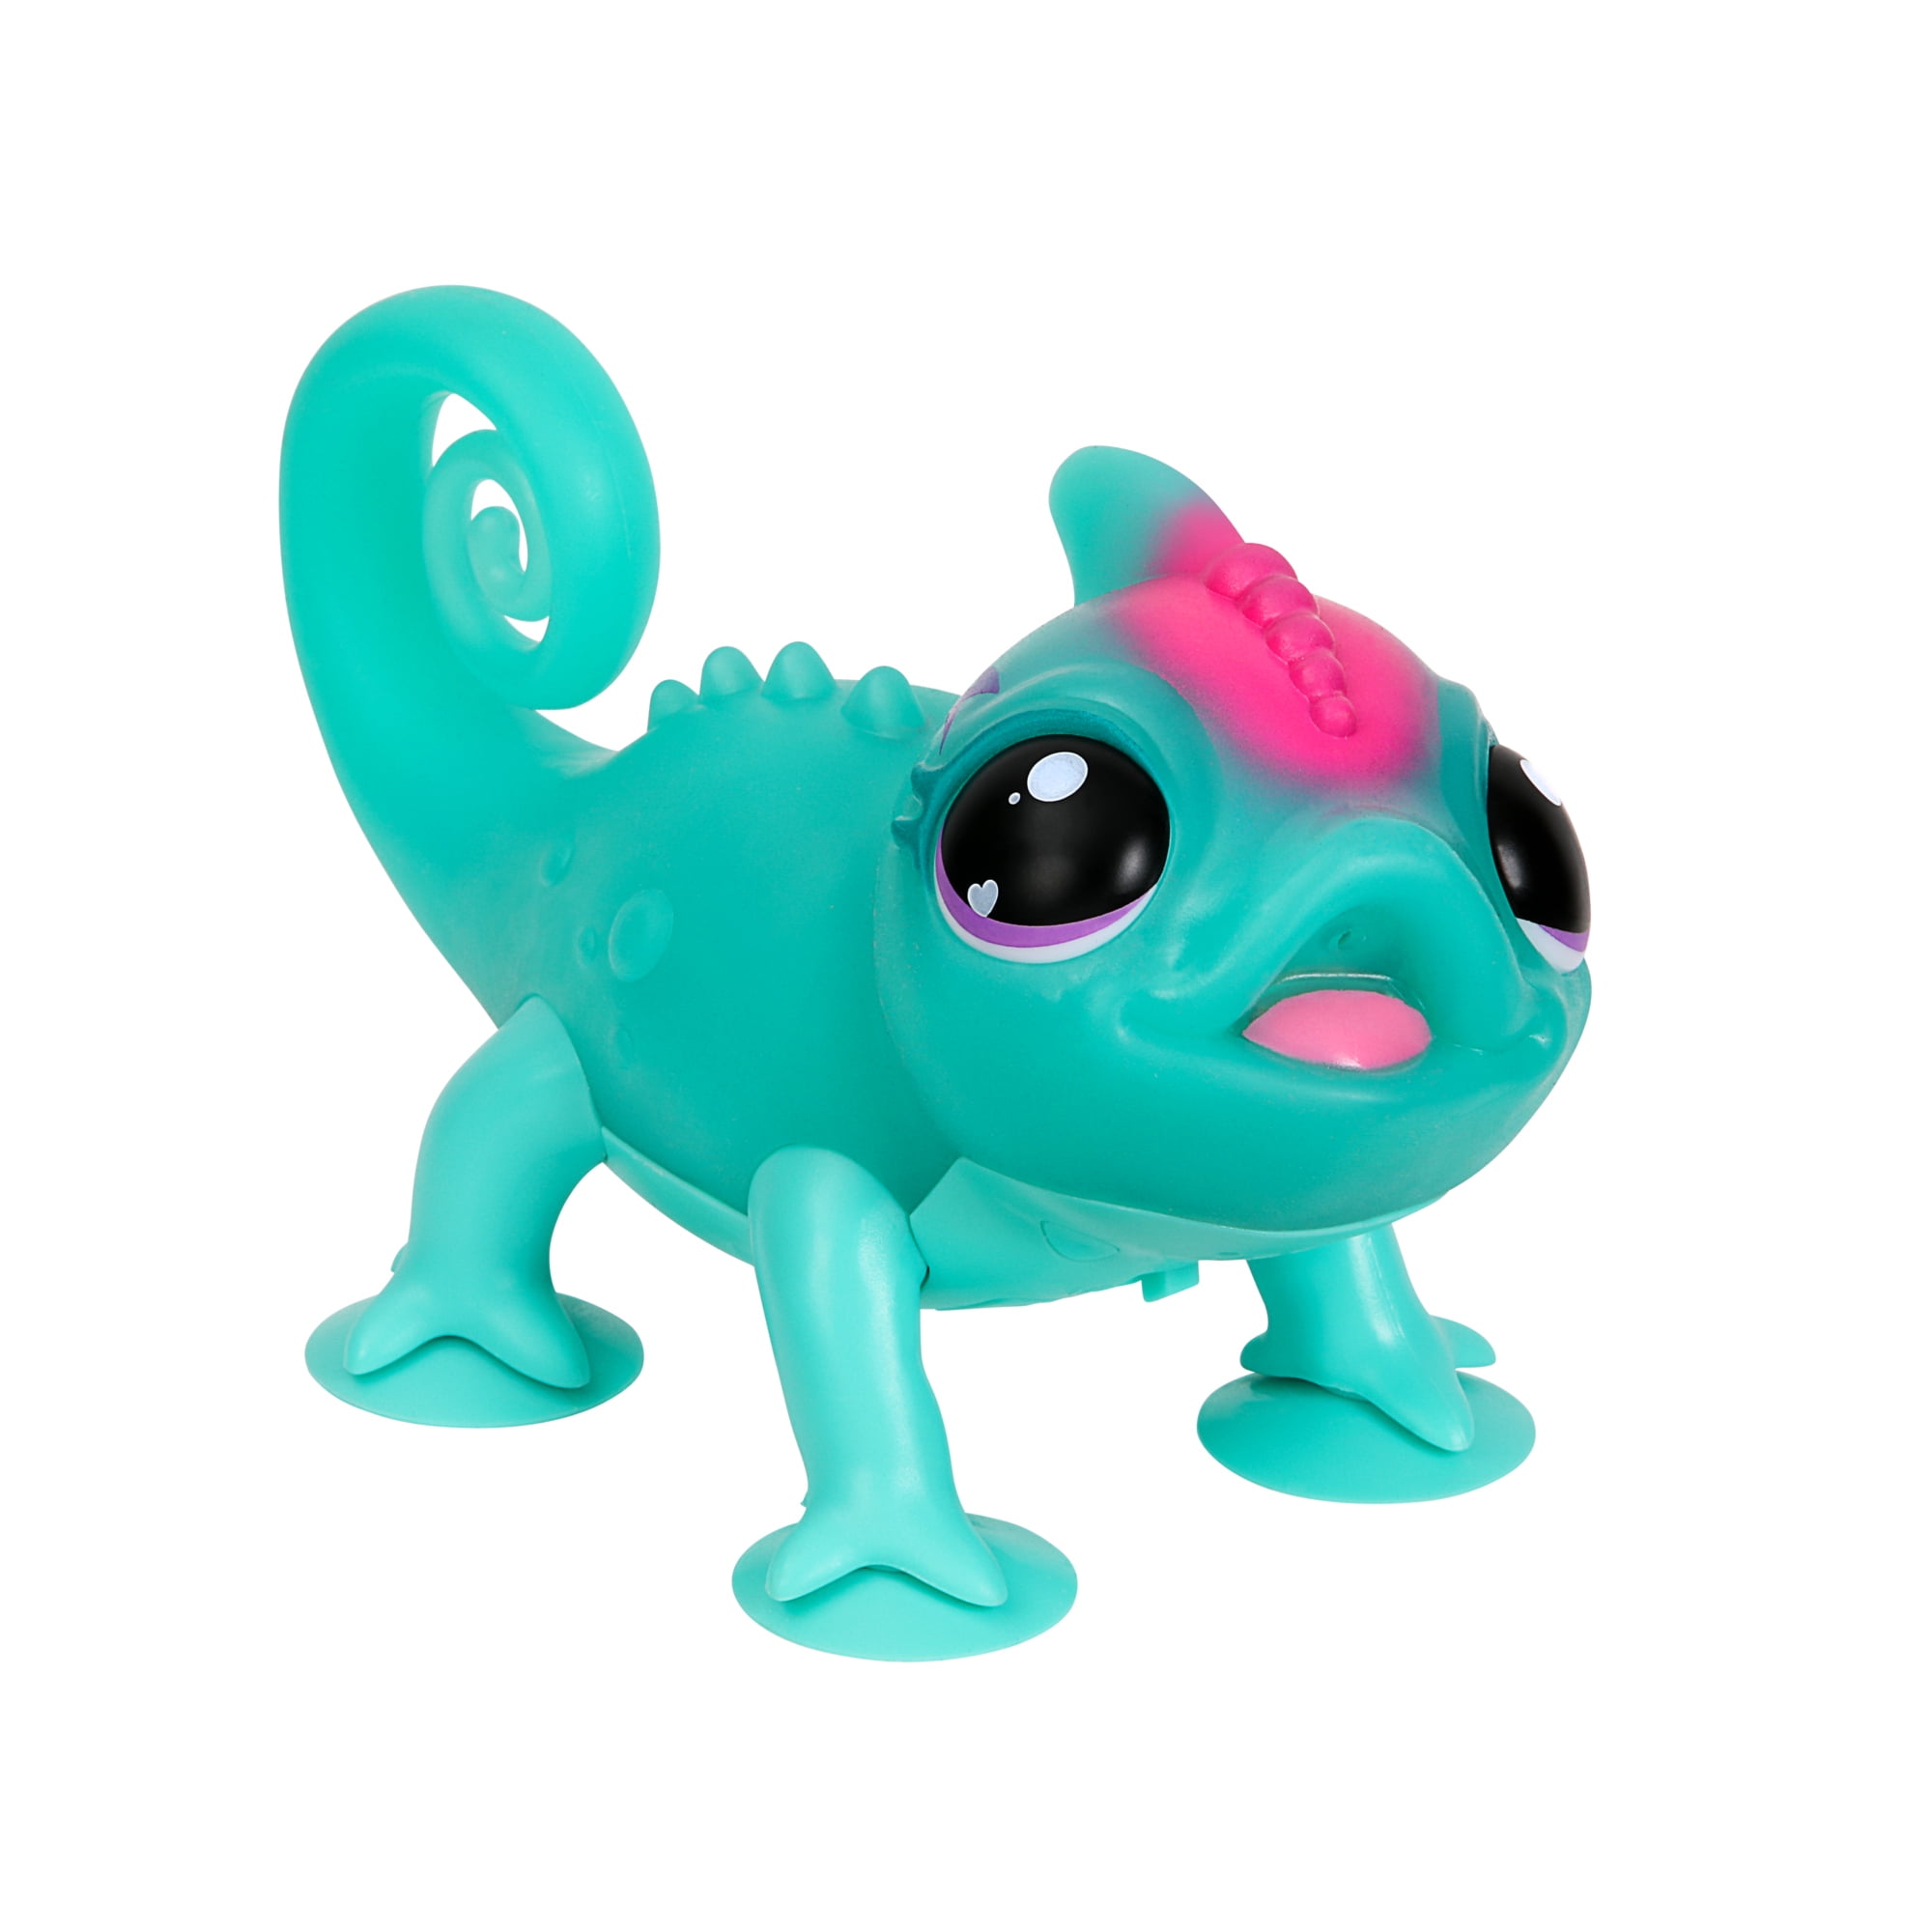 COLOUR MATCHING LIGHT UP CHAMELEON 37077 MAGICAL CUTE MOOD NIGHT CHANGING TOY 